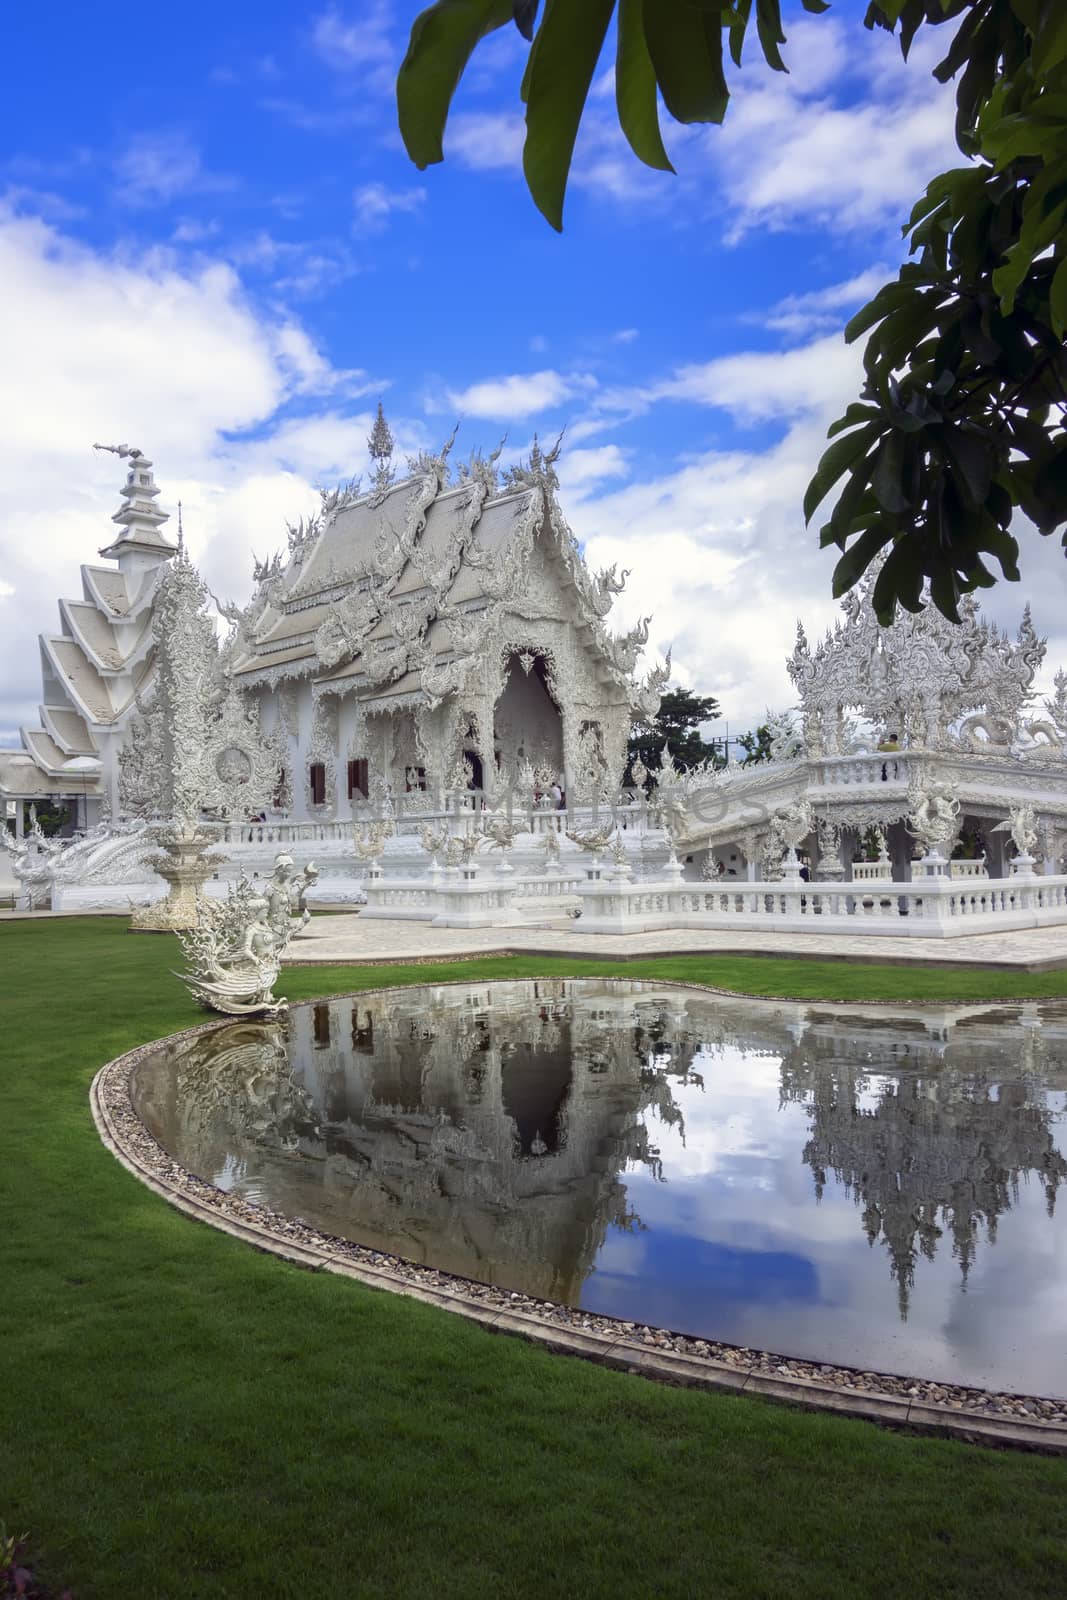 White Temple. Contemporary unconventional Buddhist temple in Chiang Rai, Thailand.